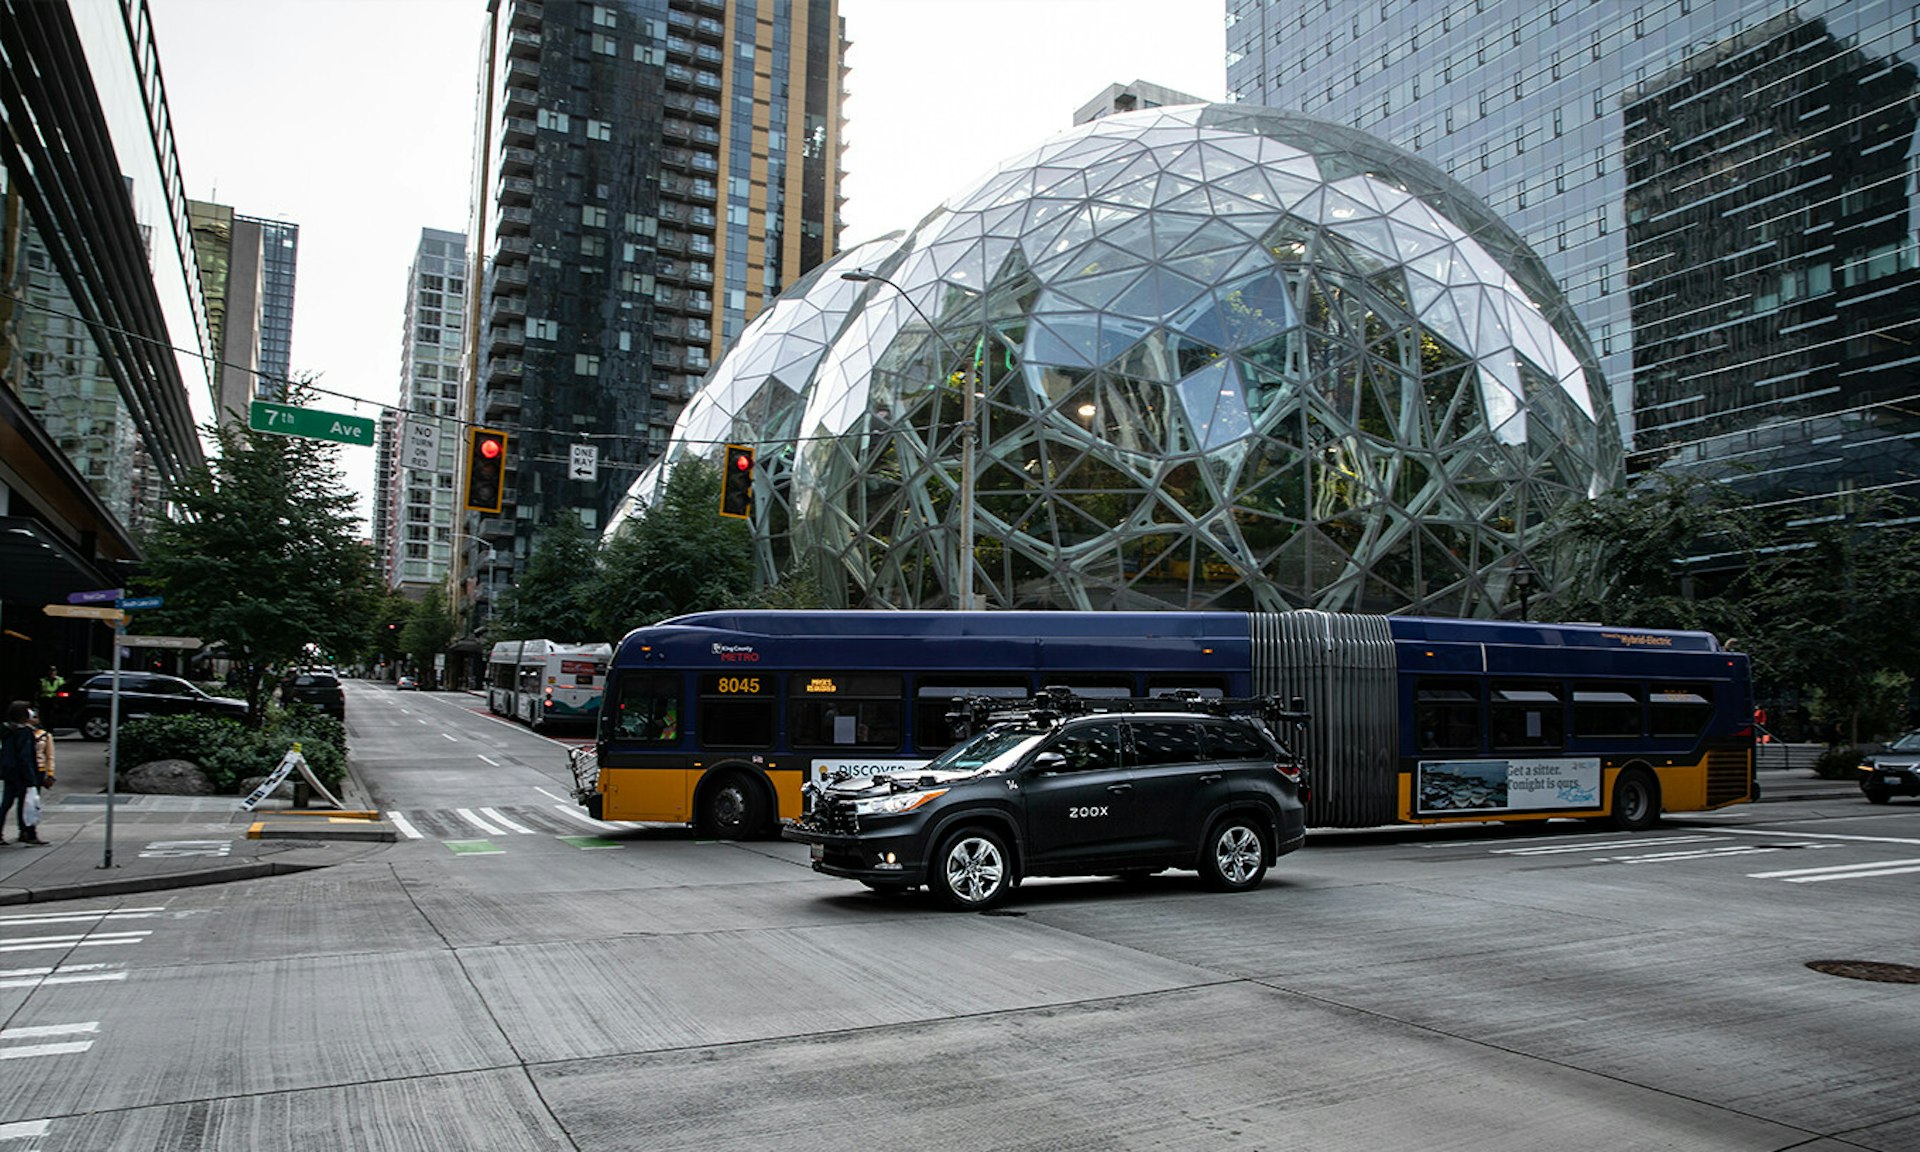 zoox test vehicle driving on the street in seattle near amazon building